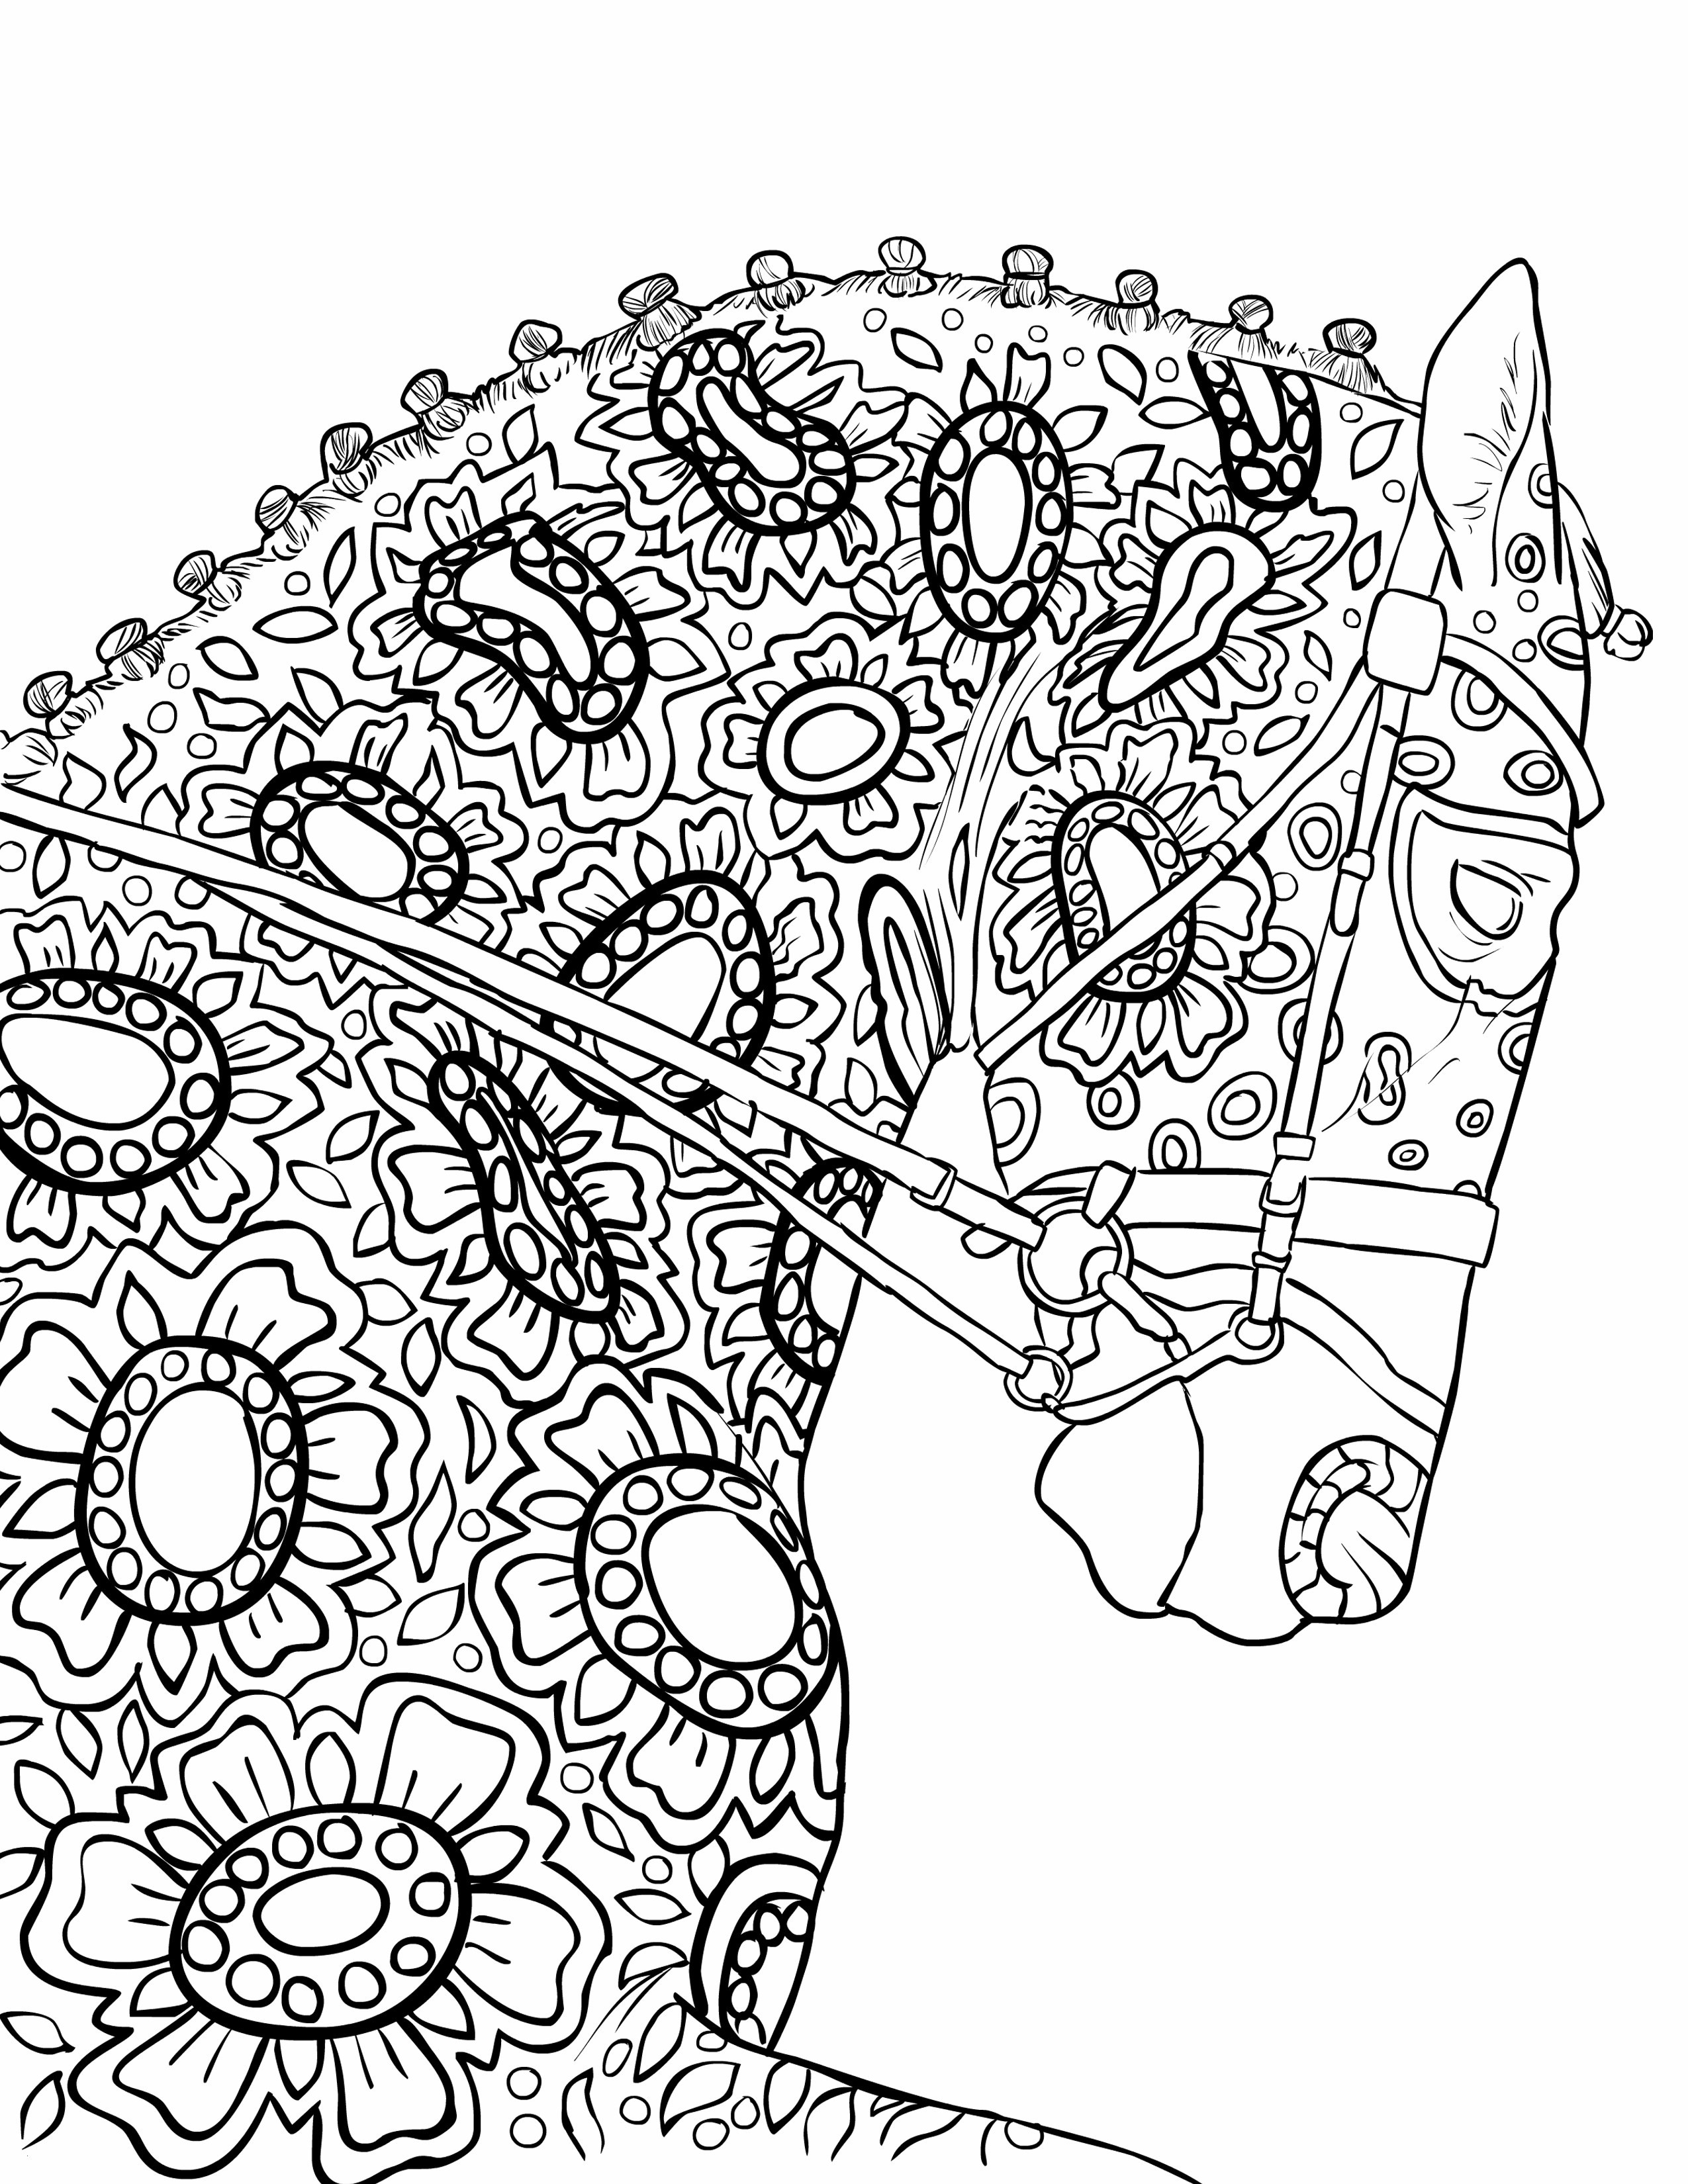 Free Wild Animal Coloring Pages Beautiful Printable Drawing Books at Getdrawings